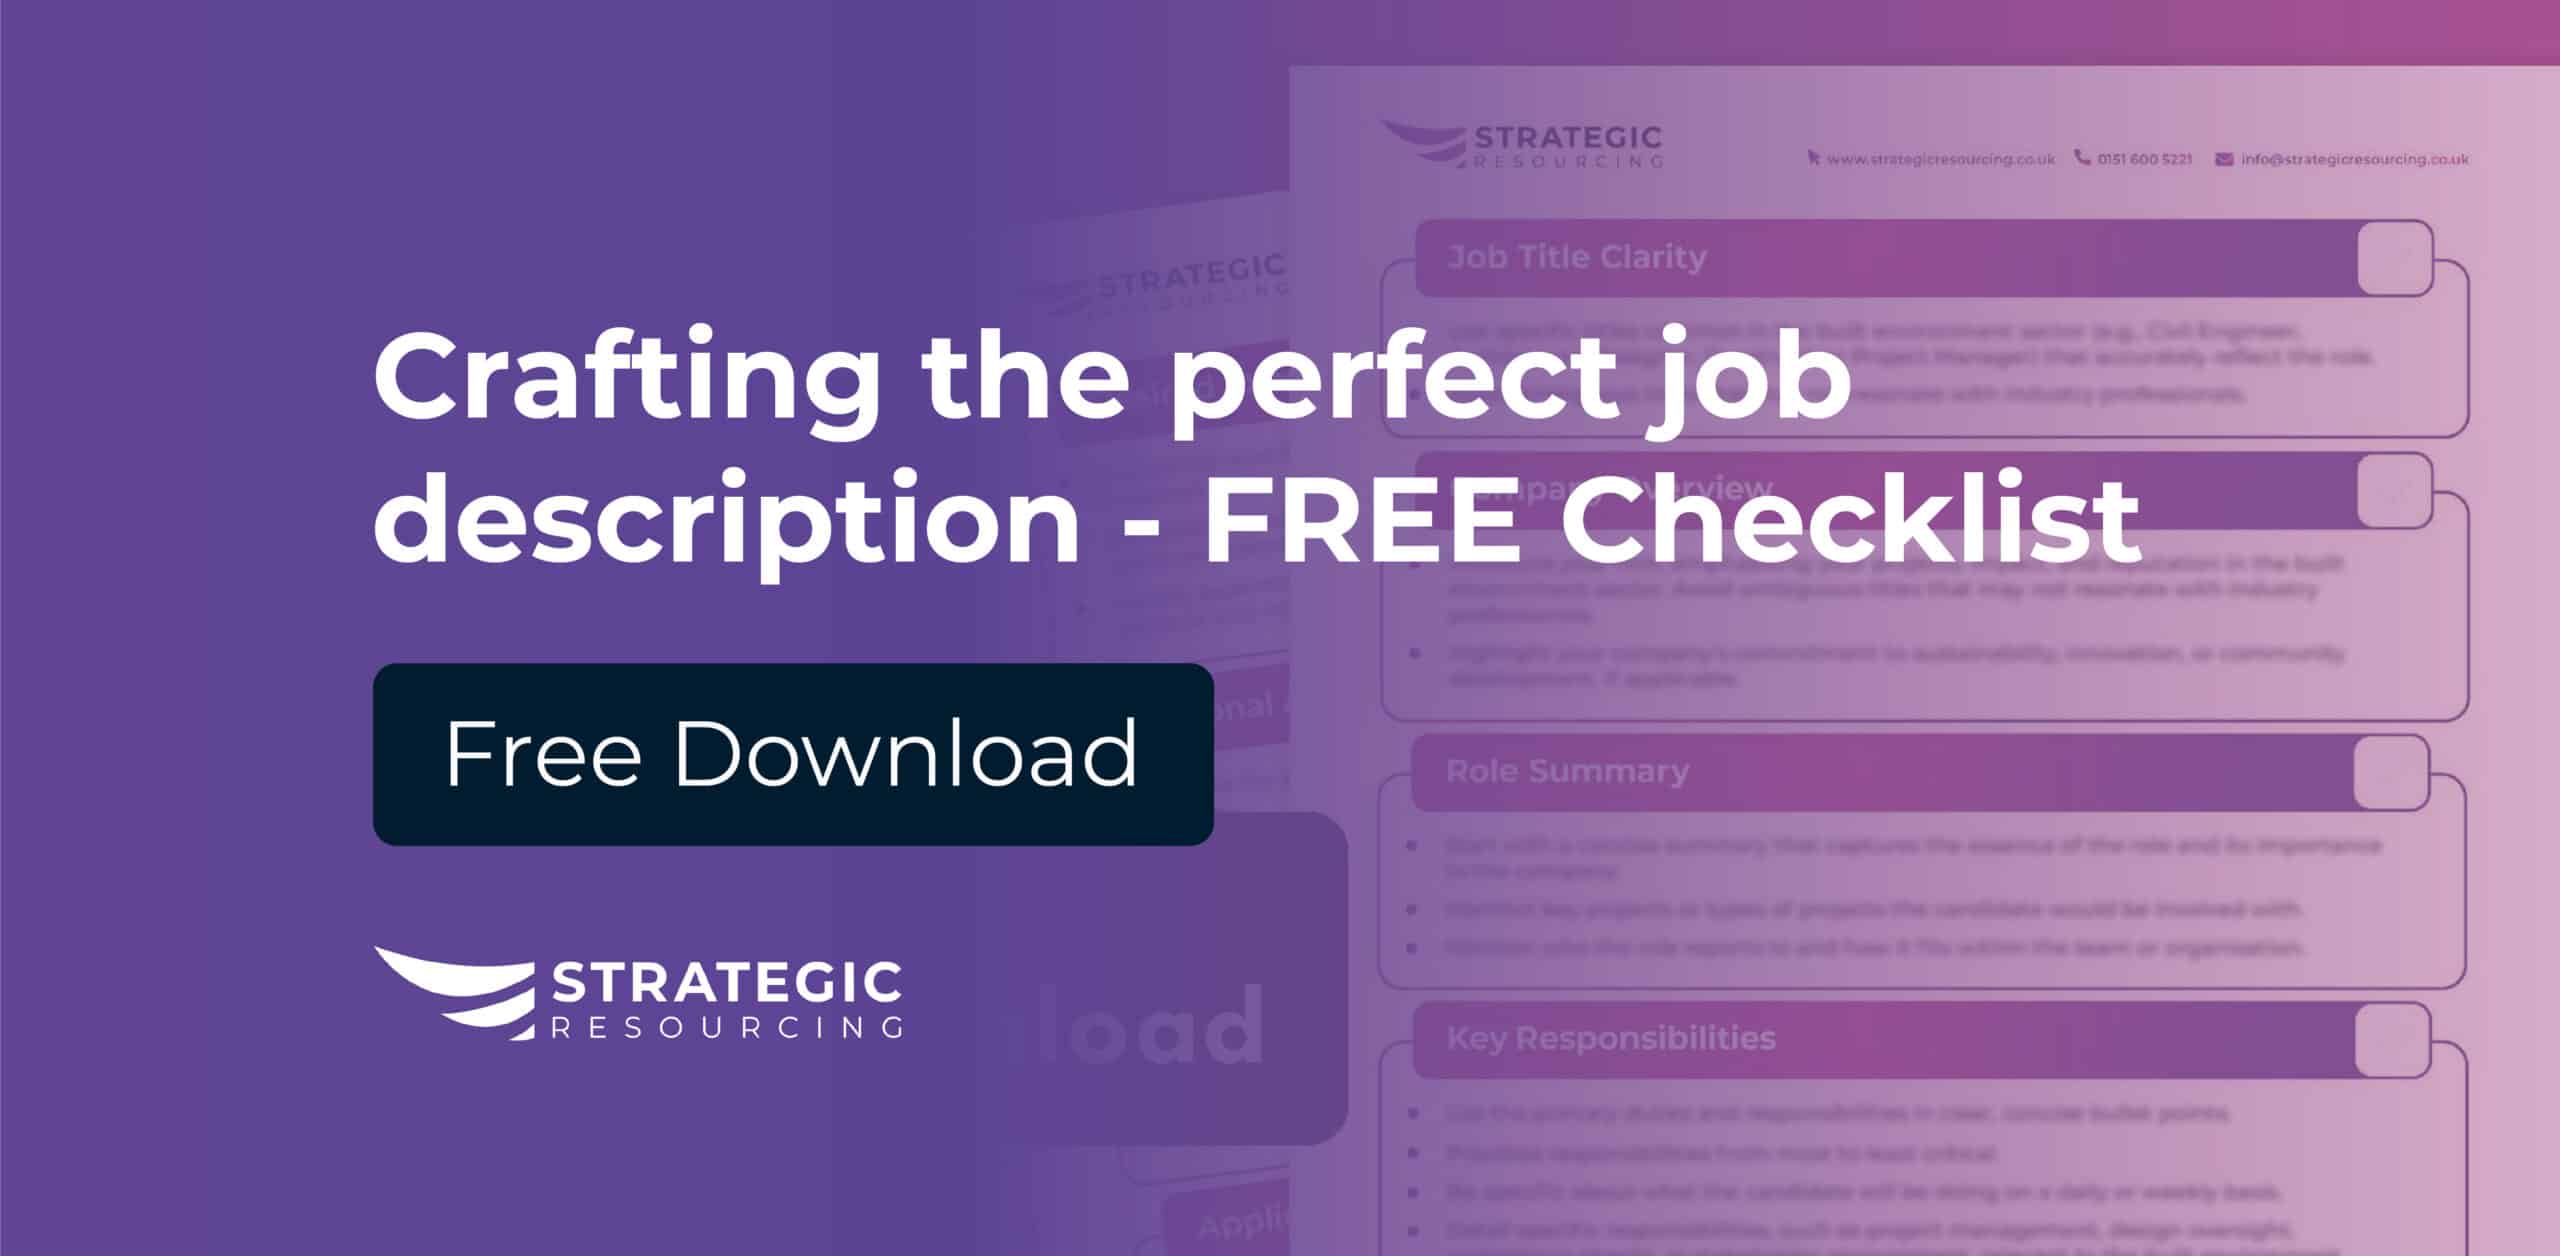 Image showing a free checklist tool to write job descriptions specifically for the built environment.